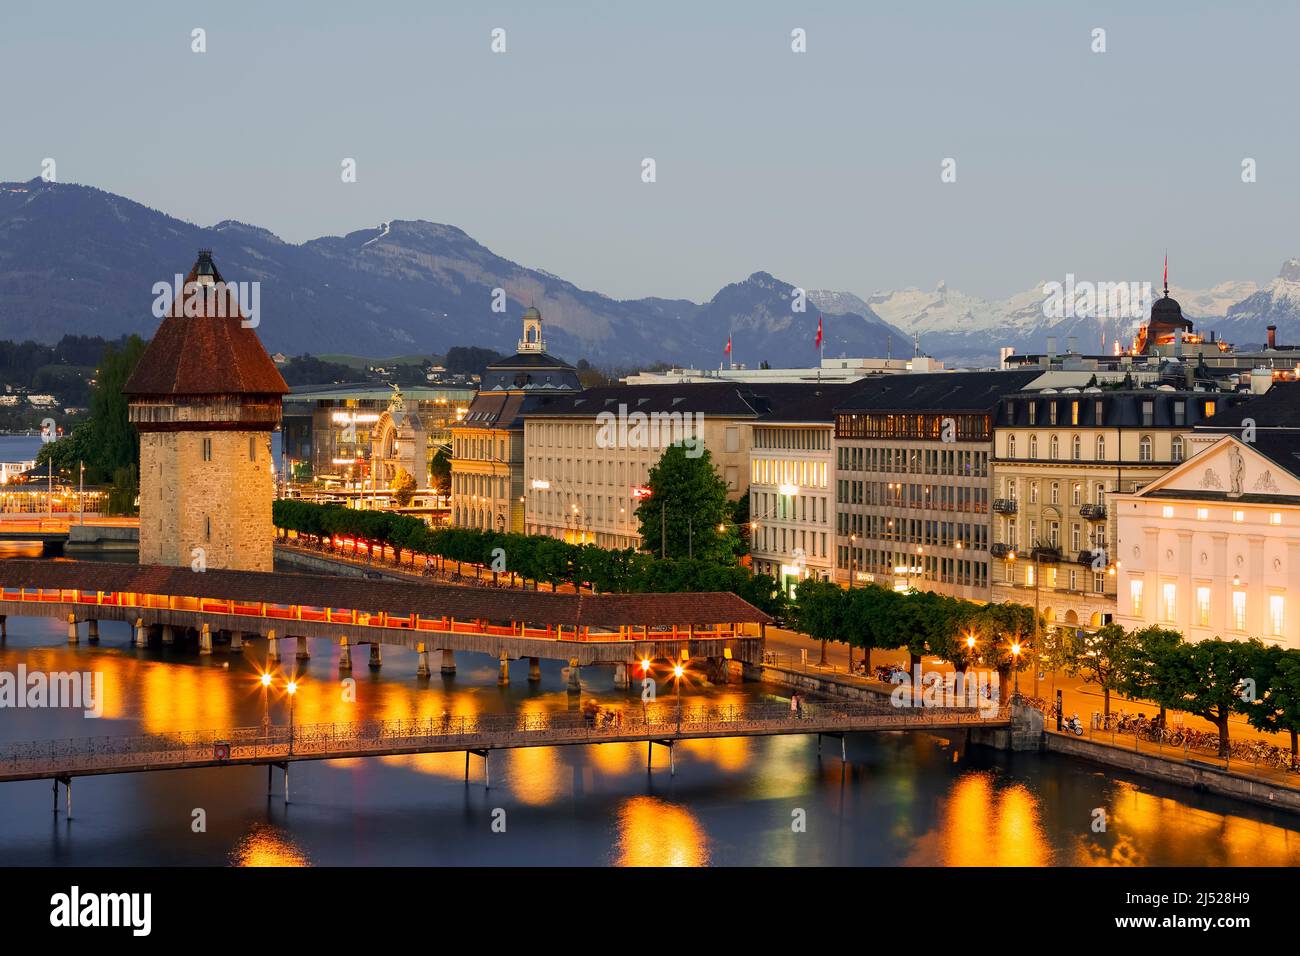 Lucerne, Switzerland - May 06, 2016: Night view towards the octagonal tower, the Wasserturm, which was built in the Reuss River and is right next to t Stock Photo